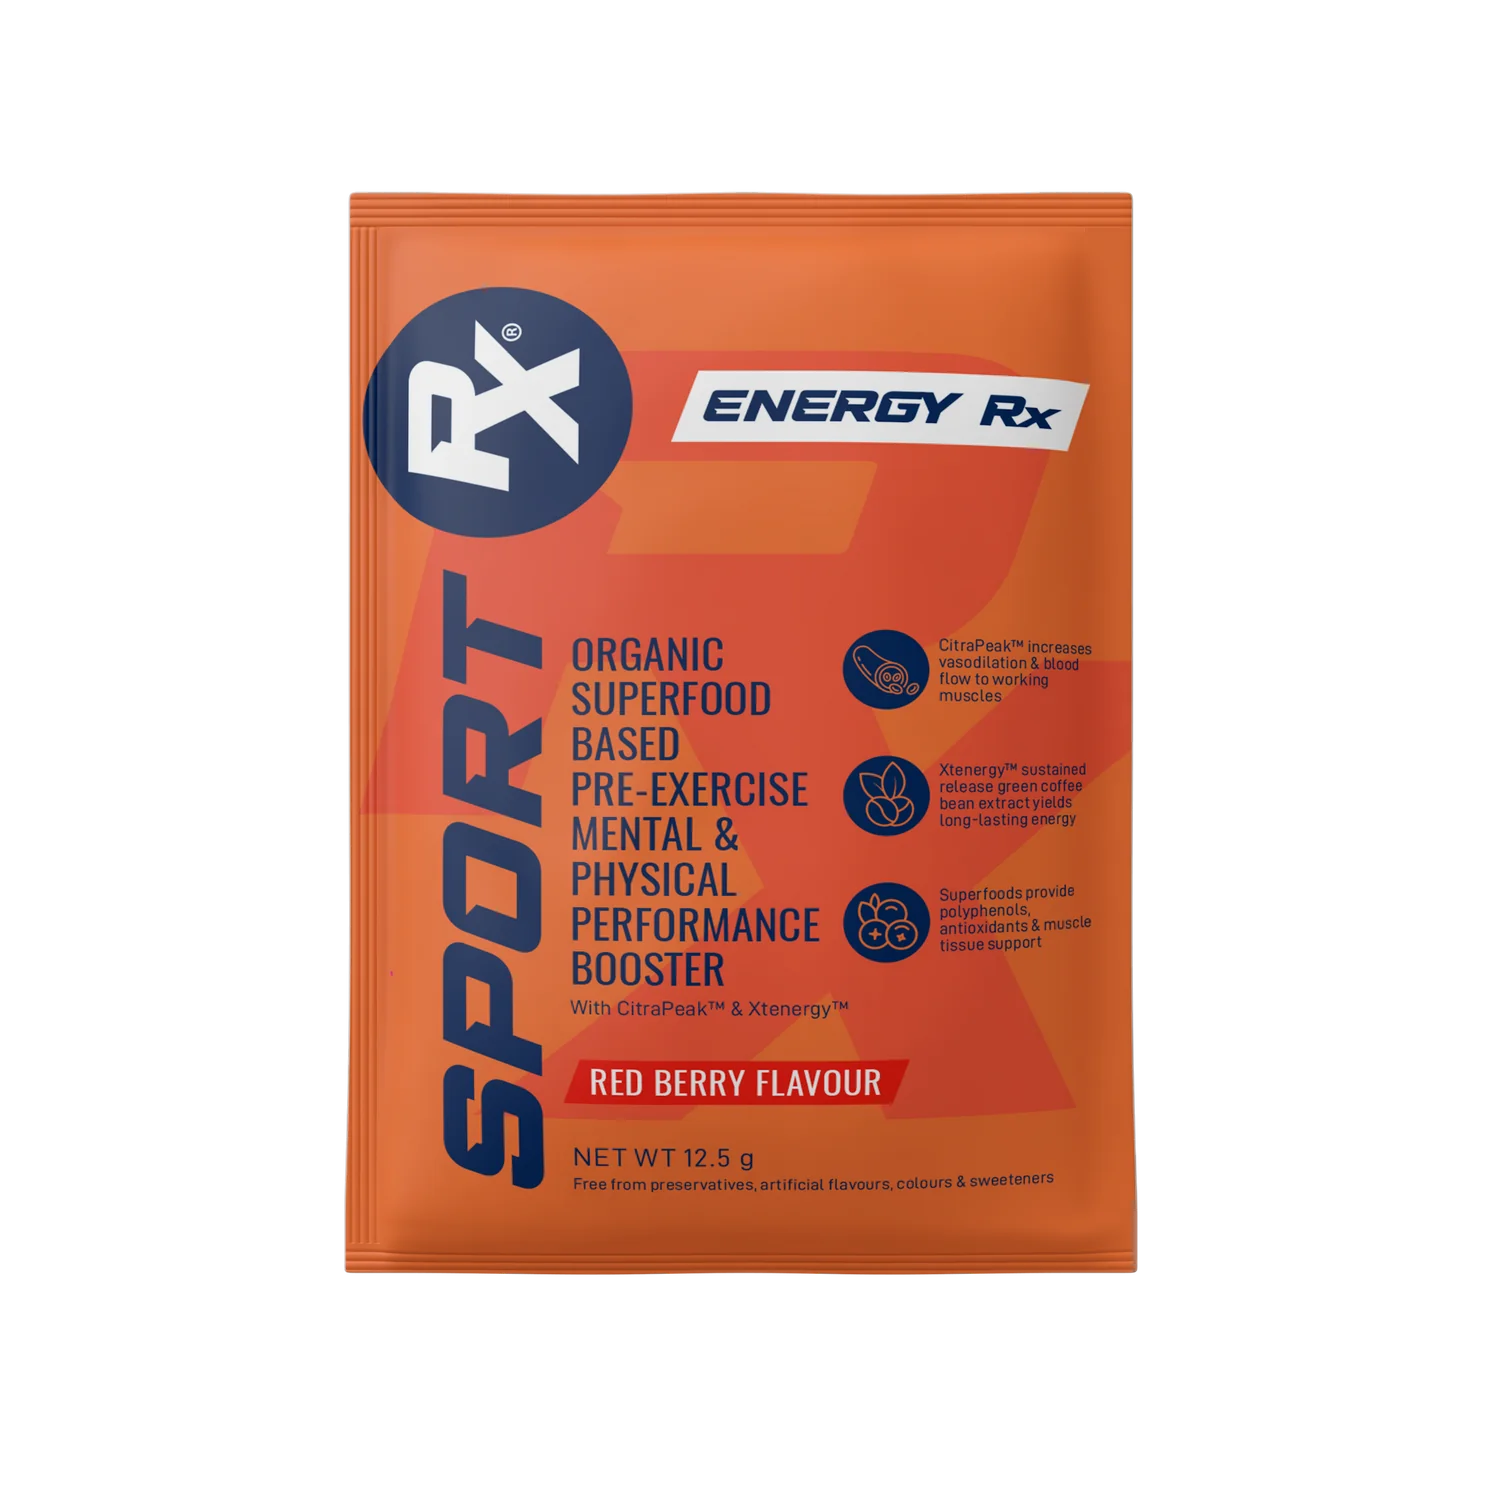 Energize your workout with Sport RX - Energy Rx Berry 250g, now available in a vibrant red color.